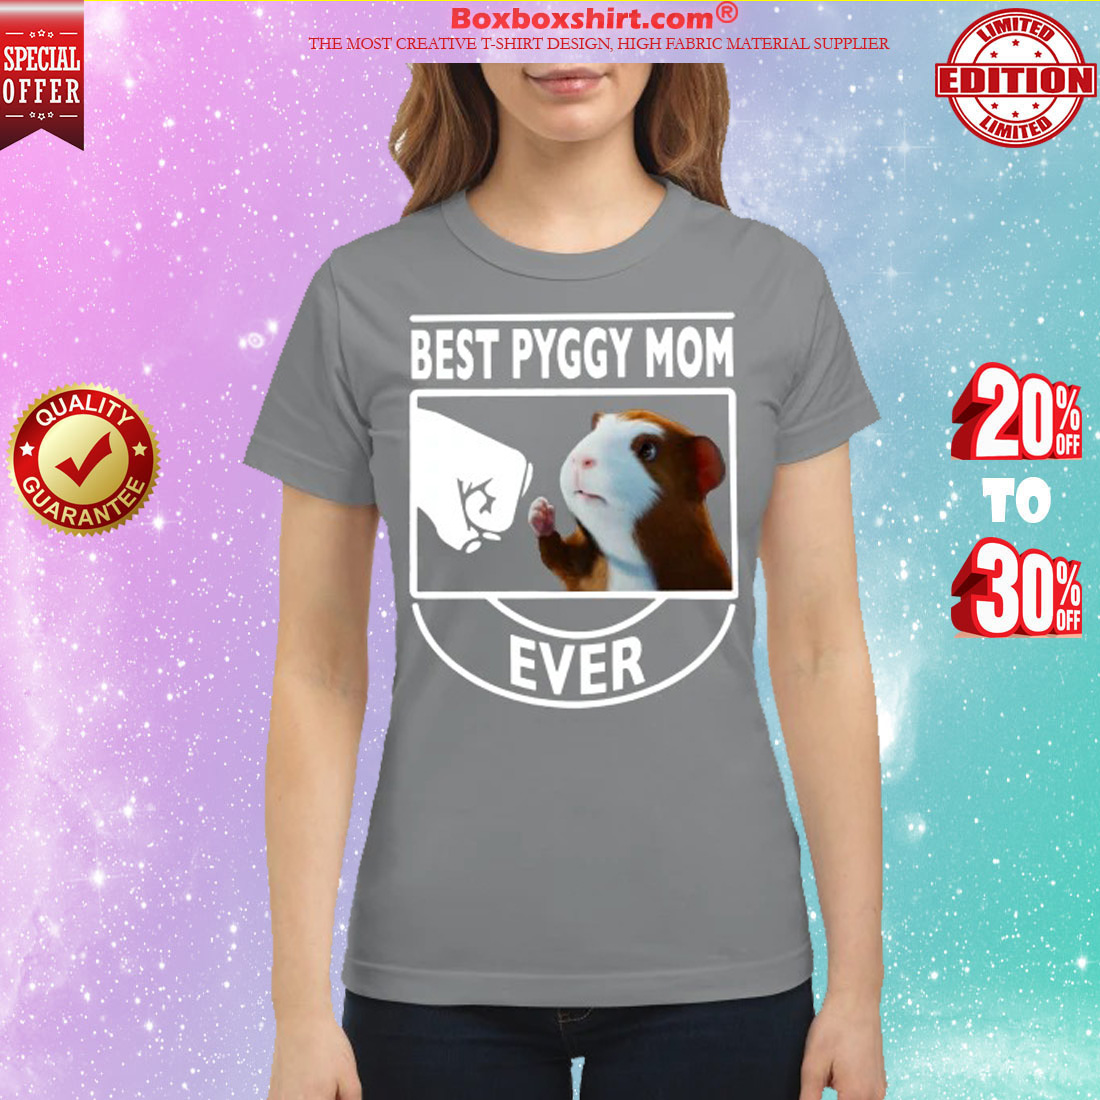 Best Pyggy mom ever classic shirt